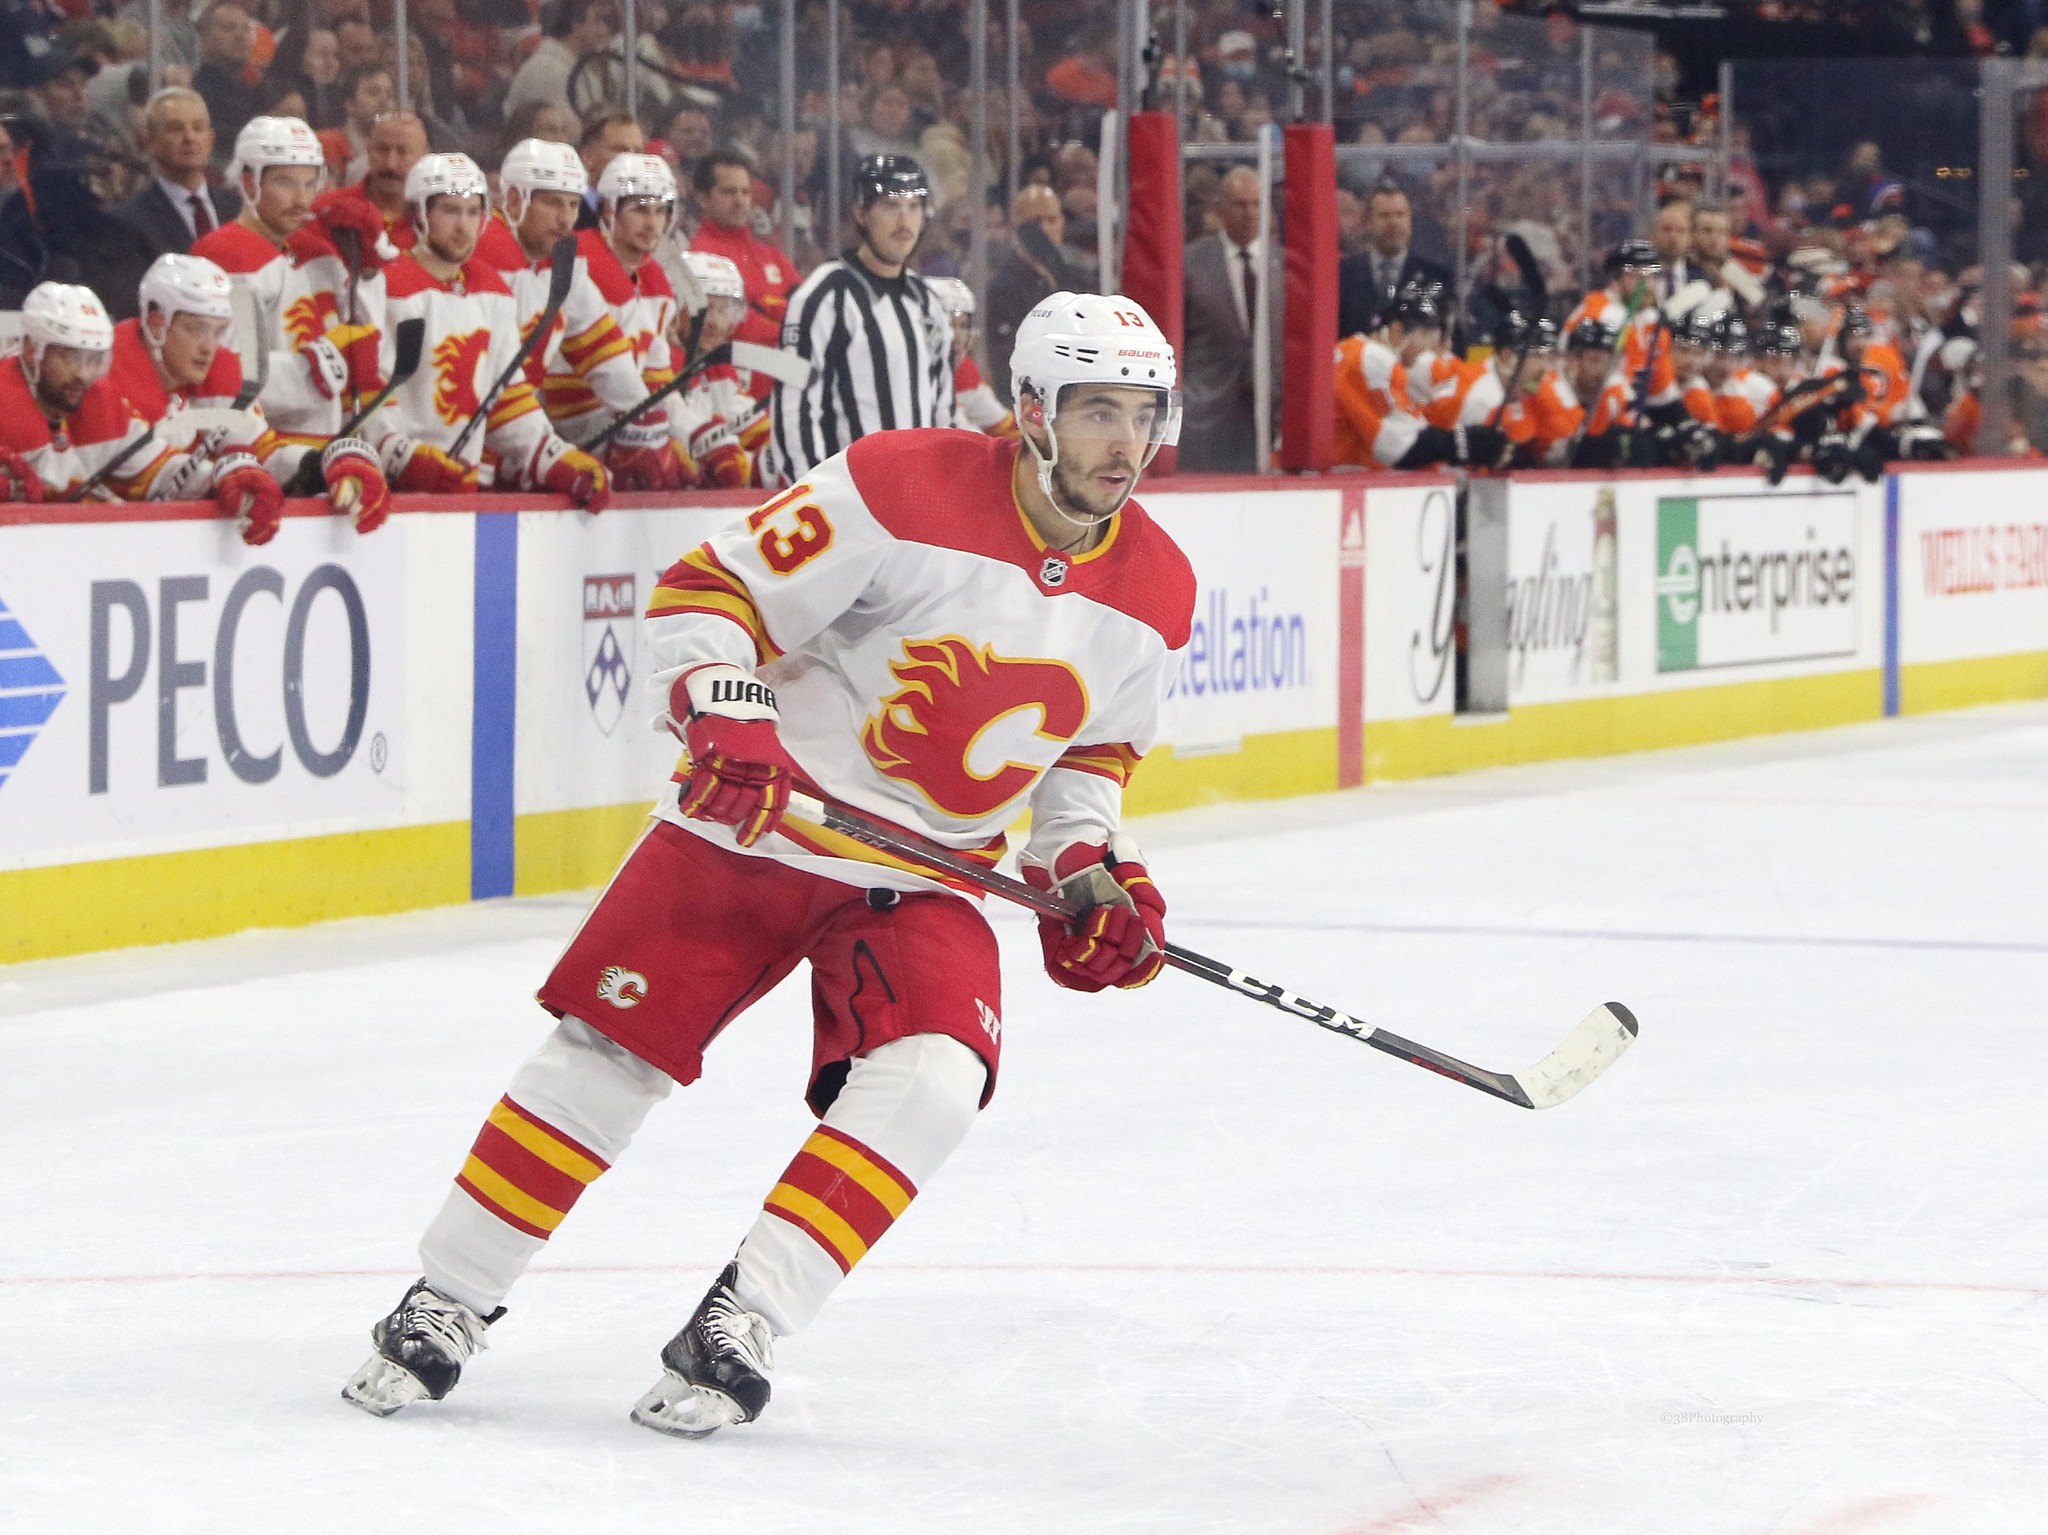 3 Takeaways From the Flames' Bounceback Win Over the Panthers